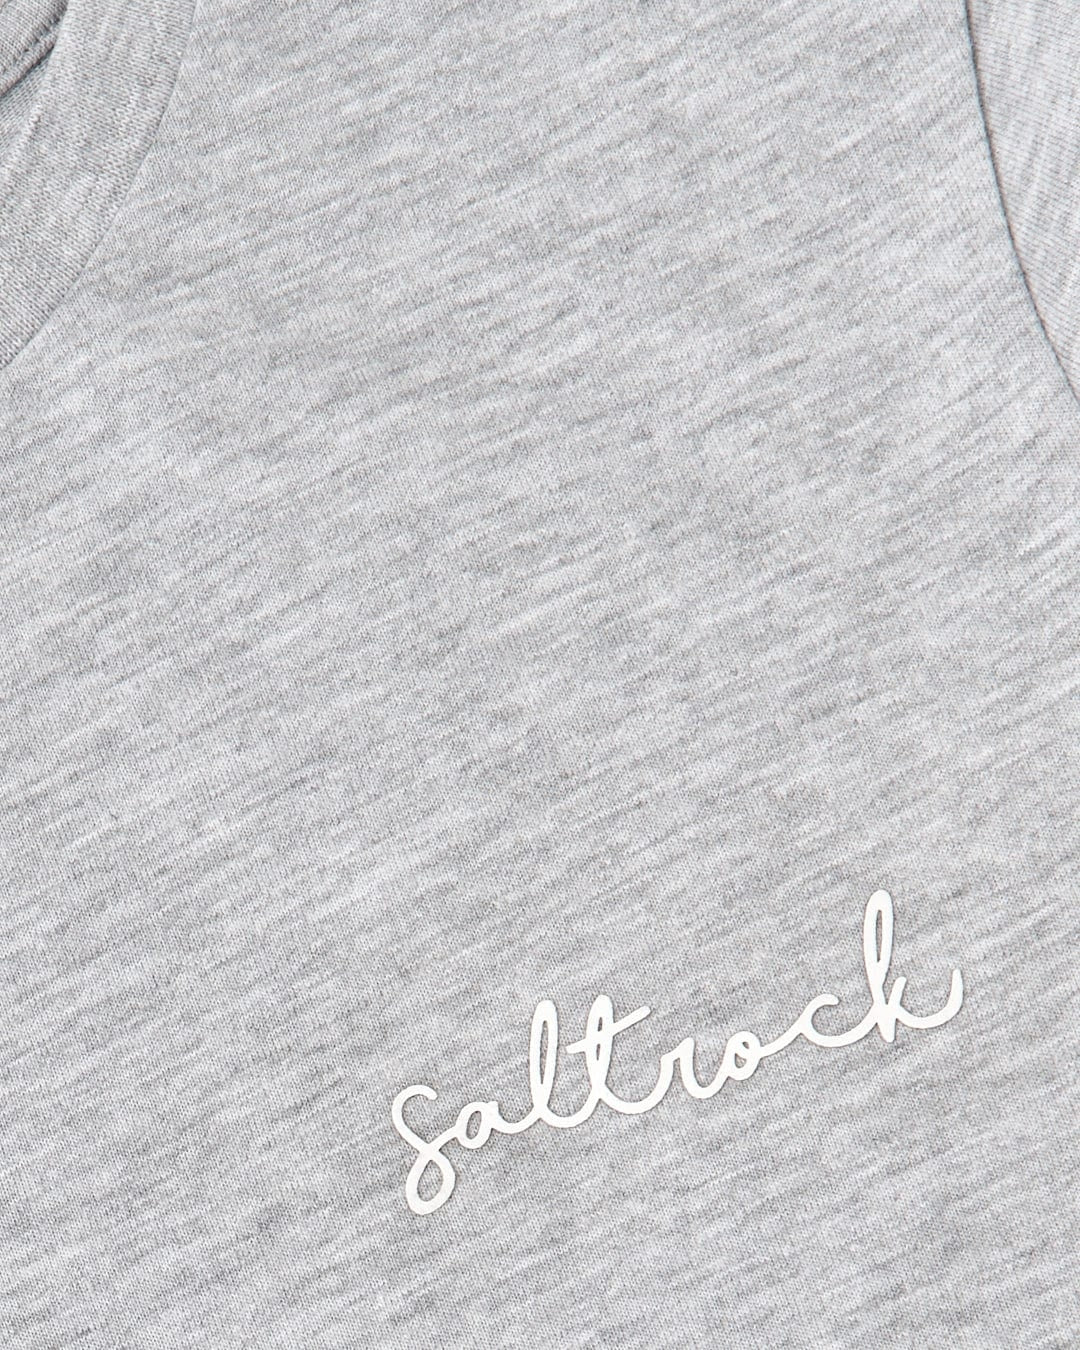 Women's Saltrock Velator plain tee in grey with small logo on the chest.